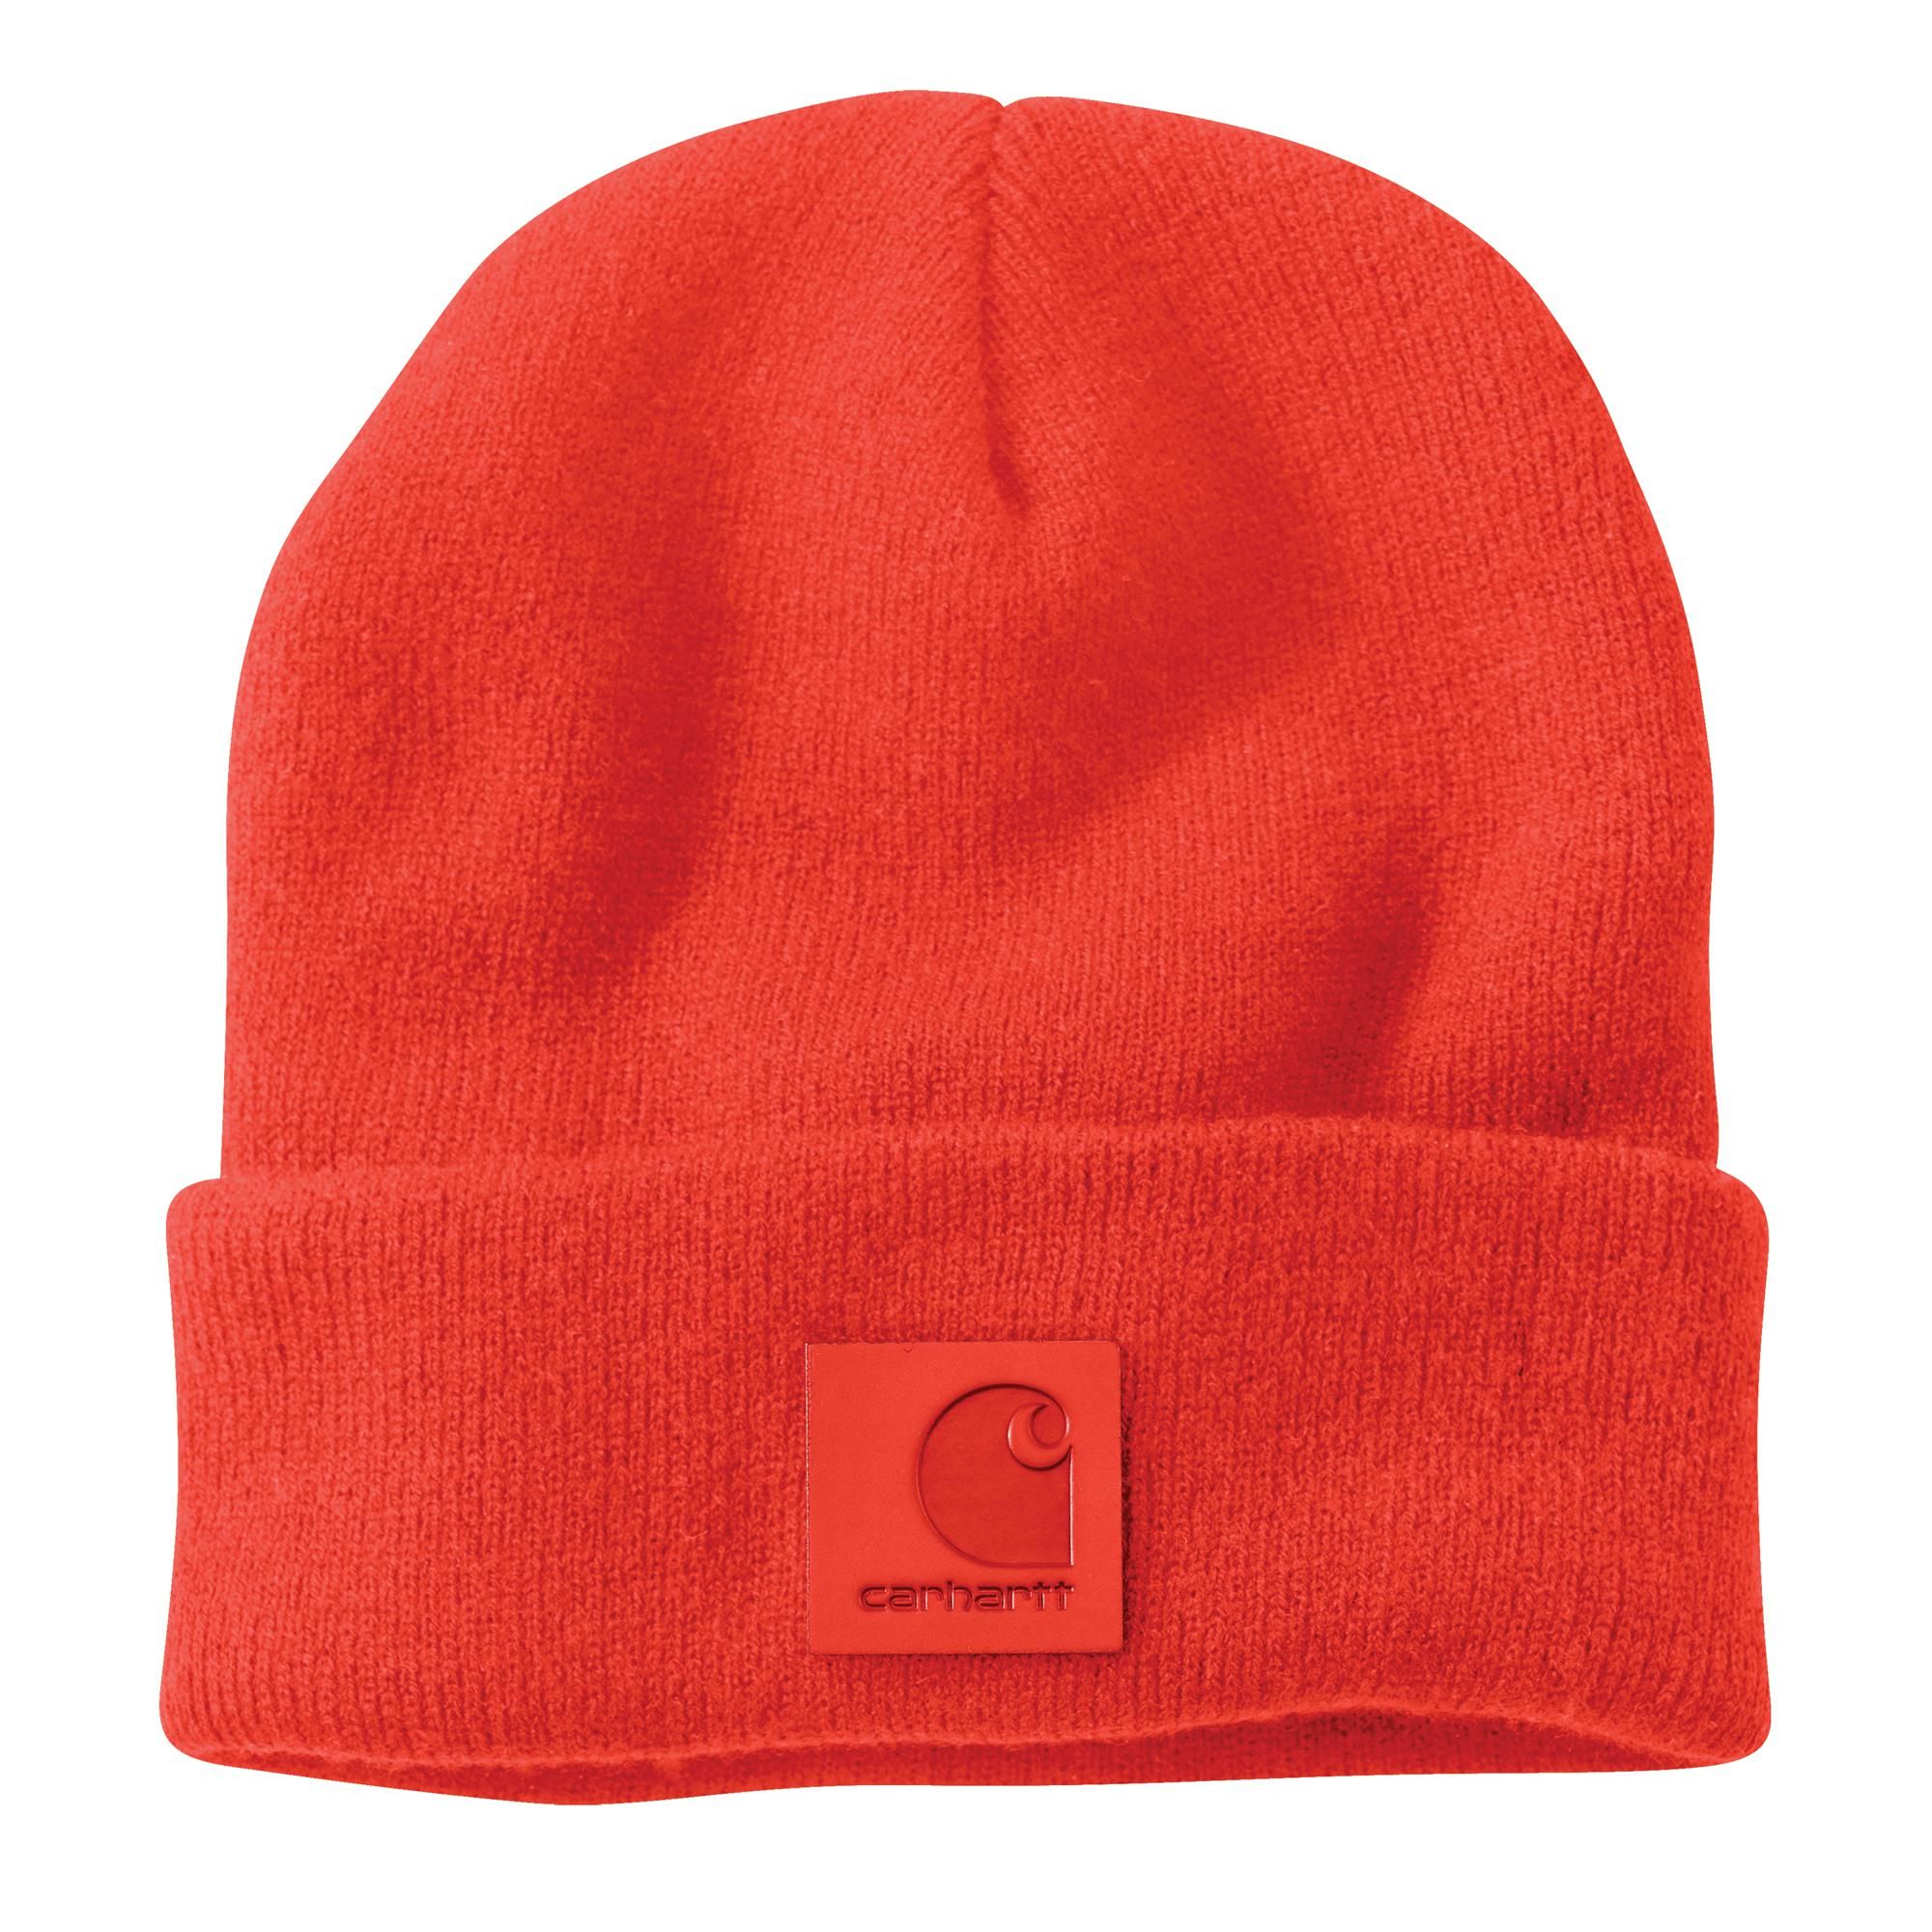 Knit Beanie Cherry Tomato Cherry T - Welcome to Apple Saddlery |  www.applesaddlery.com | Family Owned Since 1972